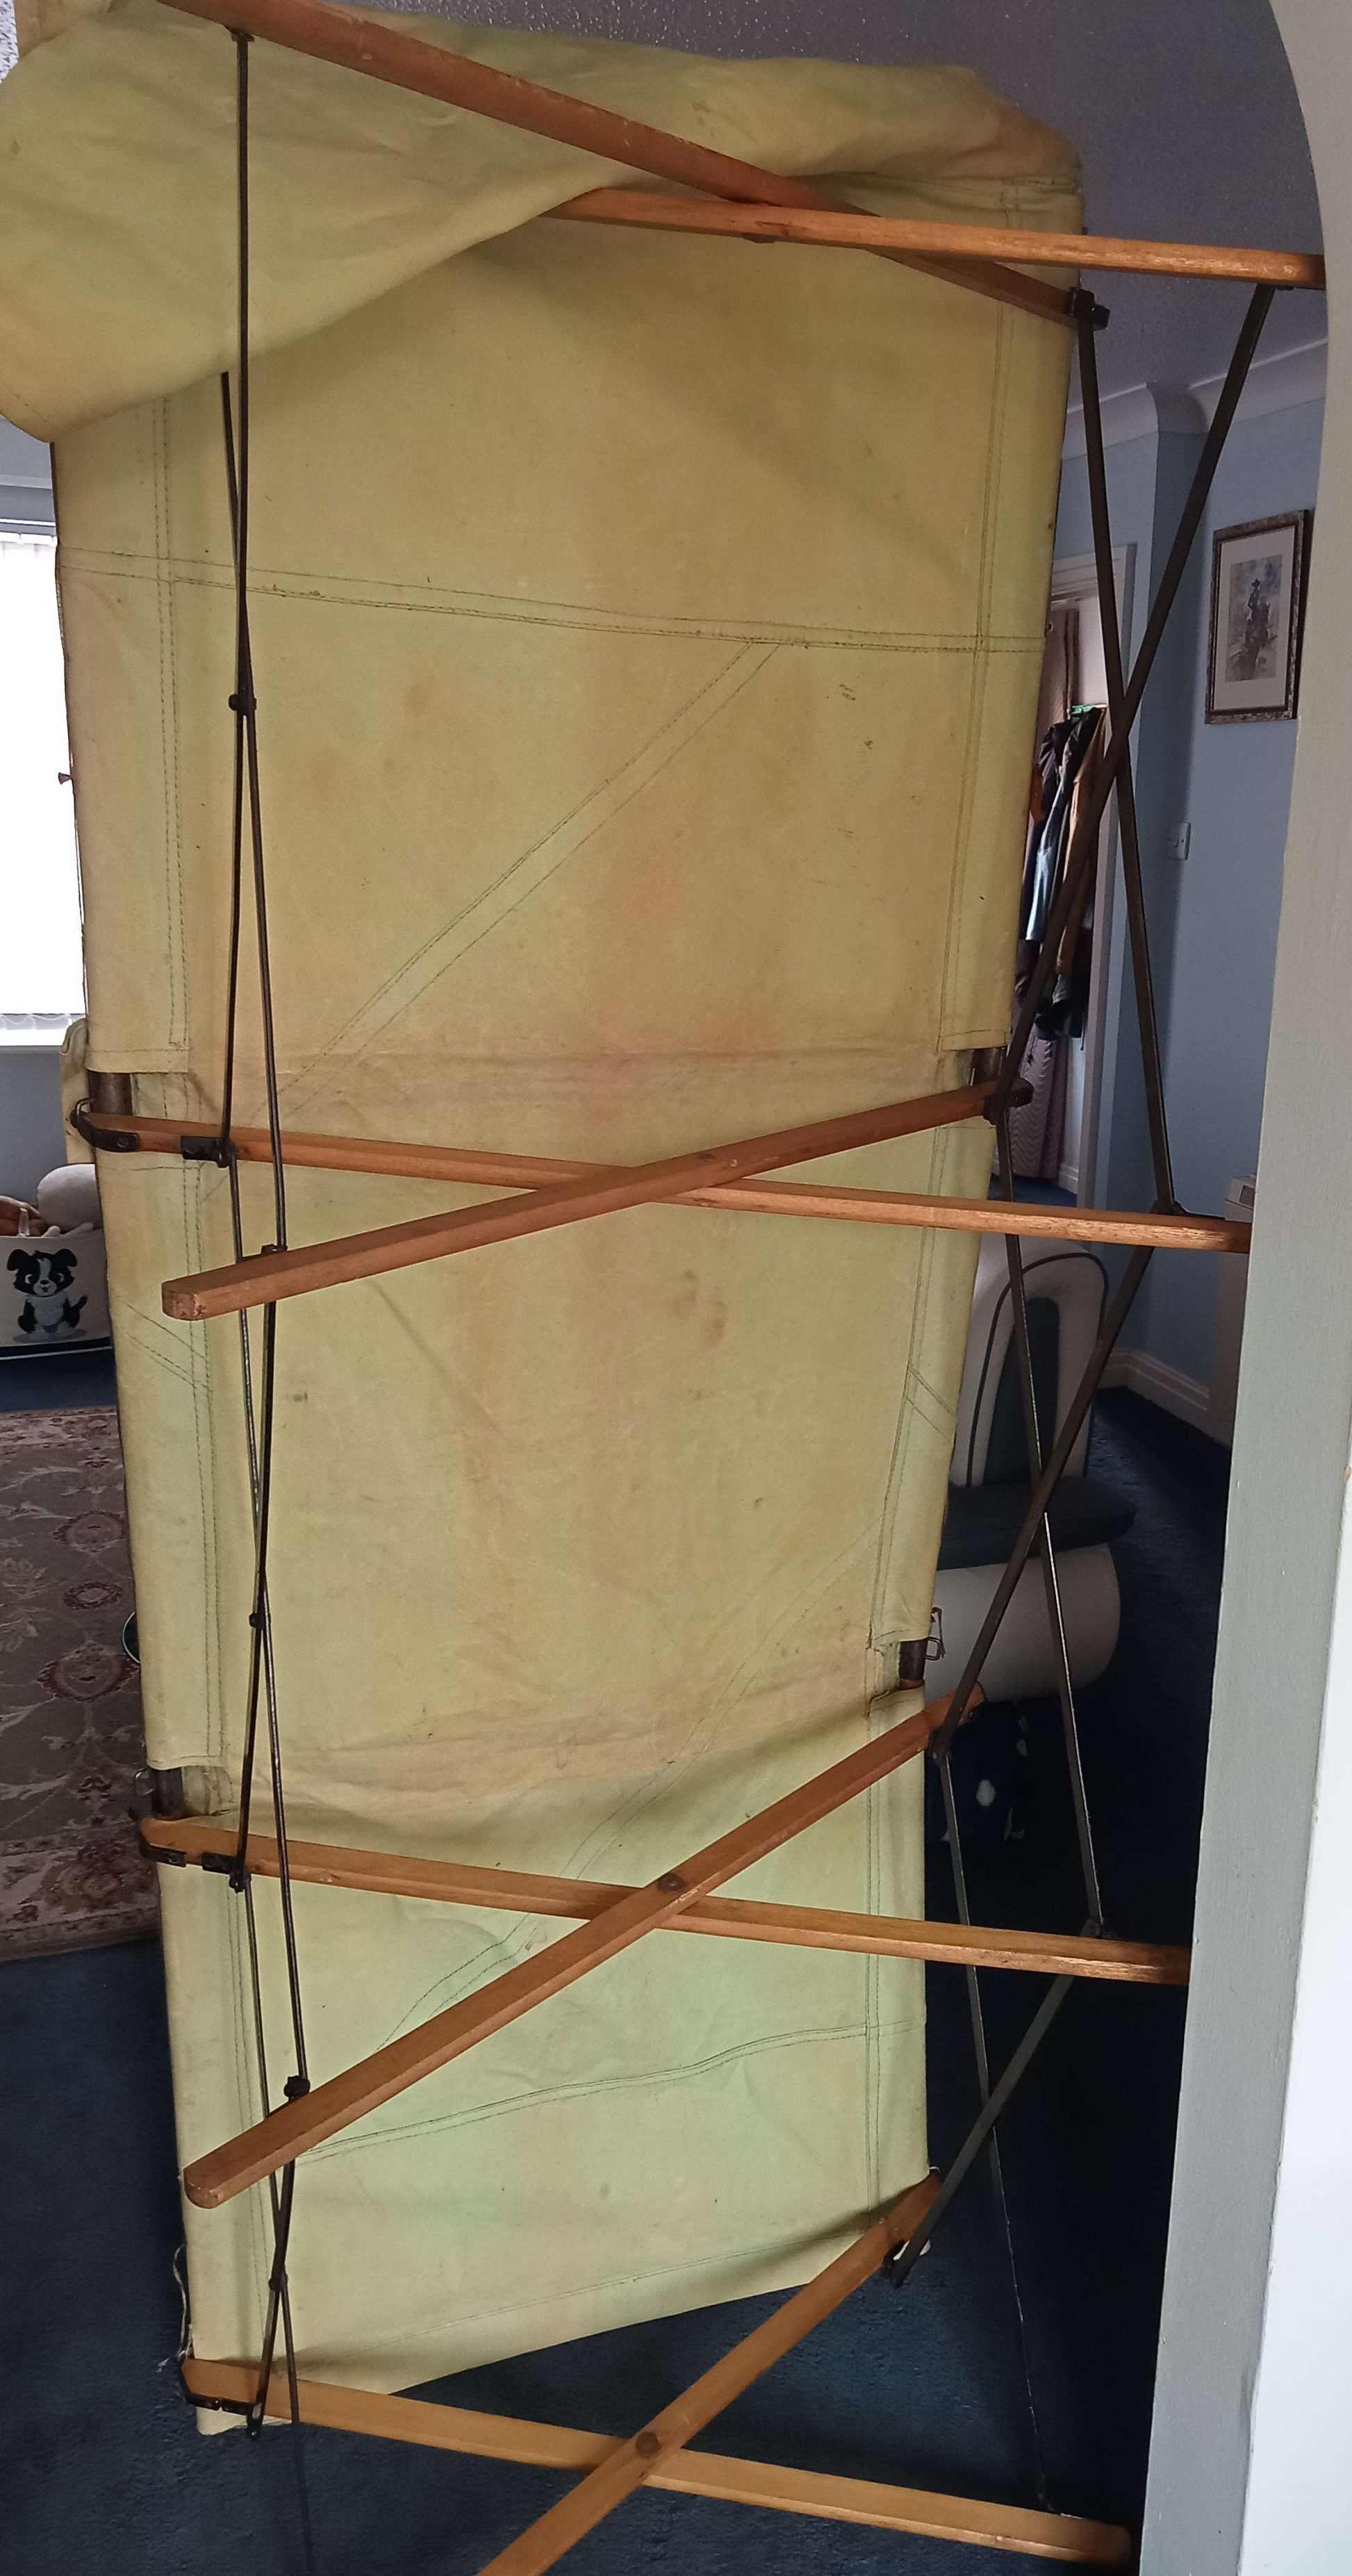 MILITARY WW11 MOBILE STRETCHER/BED Collector's item